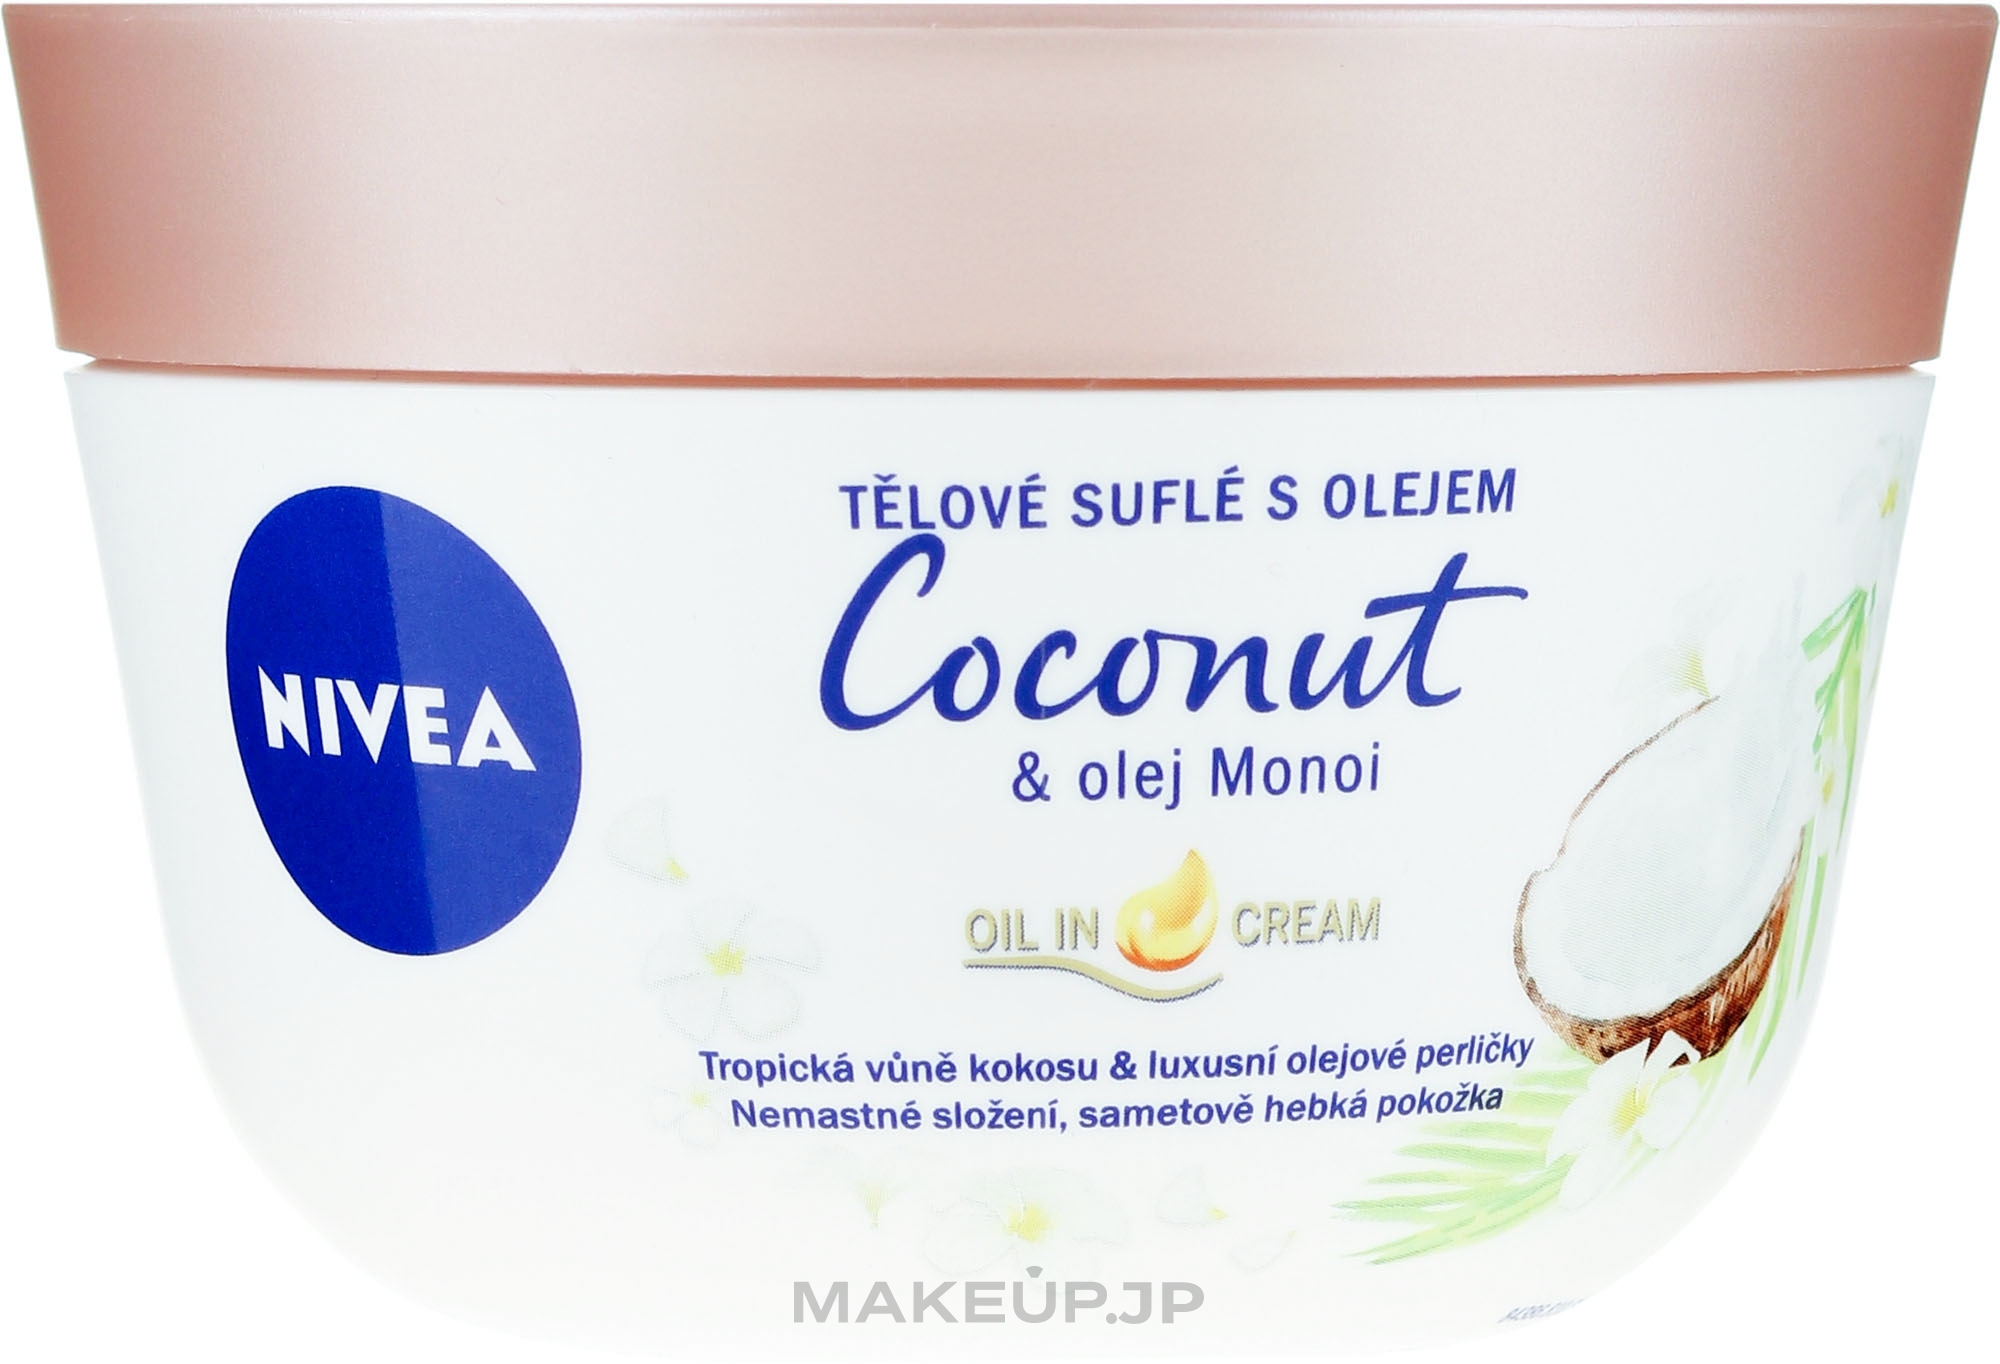 Body Souffle with Coconut and Manoi Oil - Nivea Body Souffle Coconut & Monoi Oil — photo 200 ml